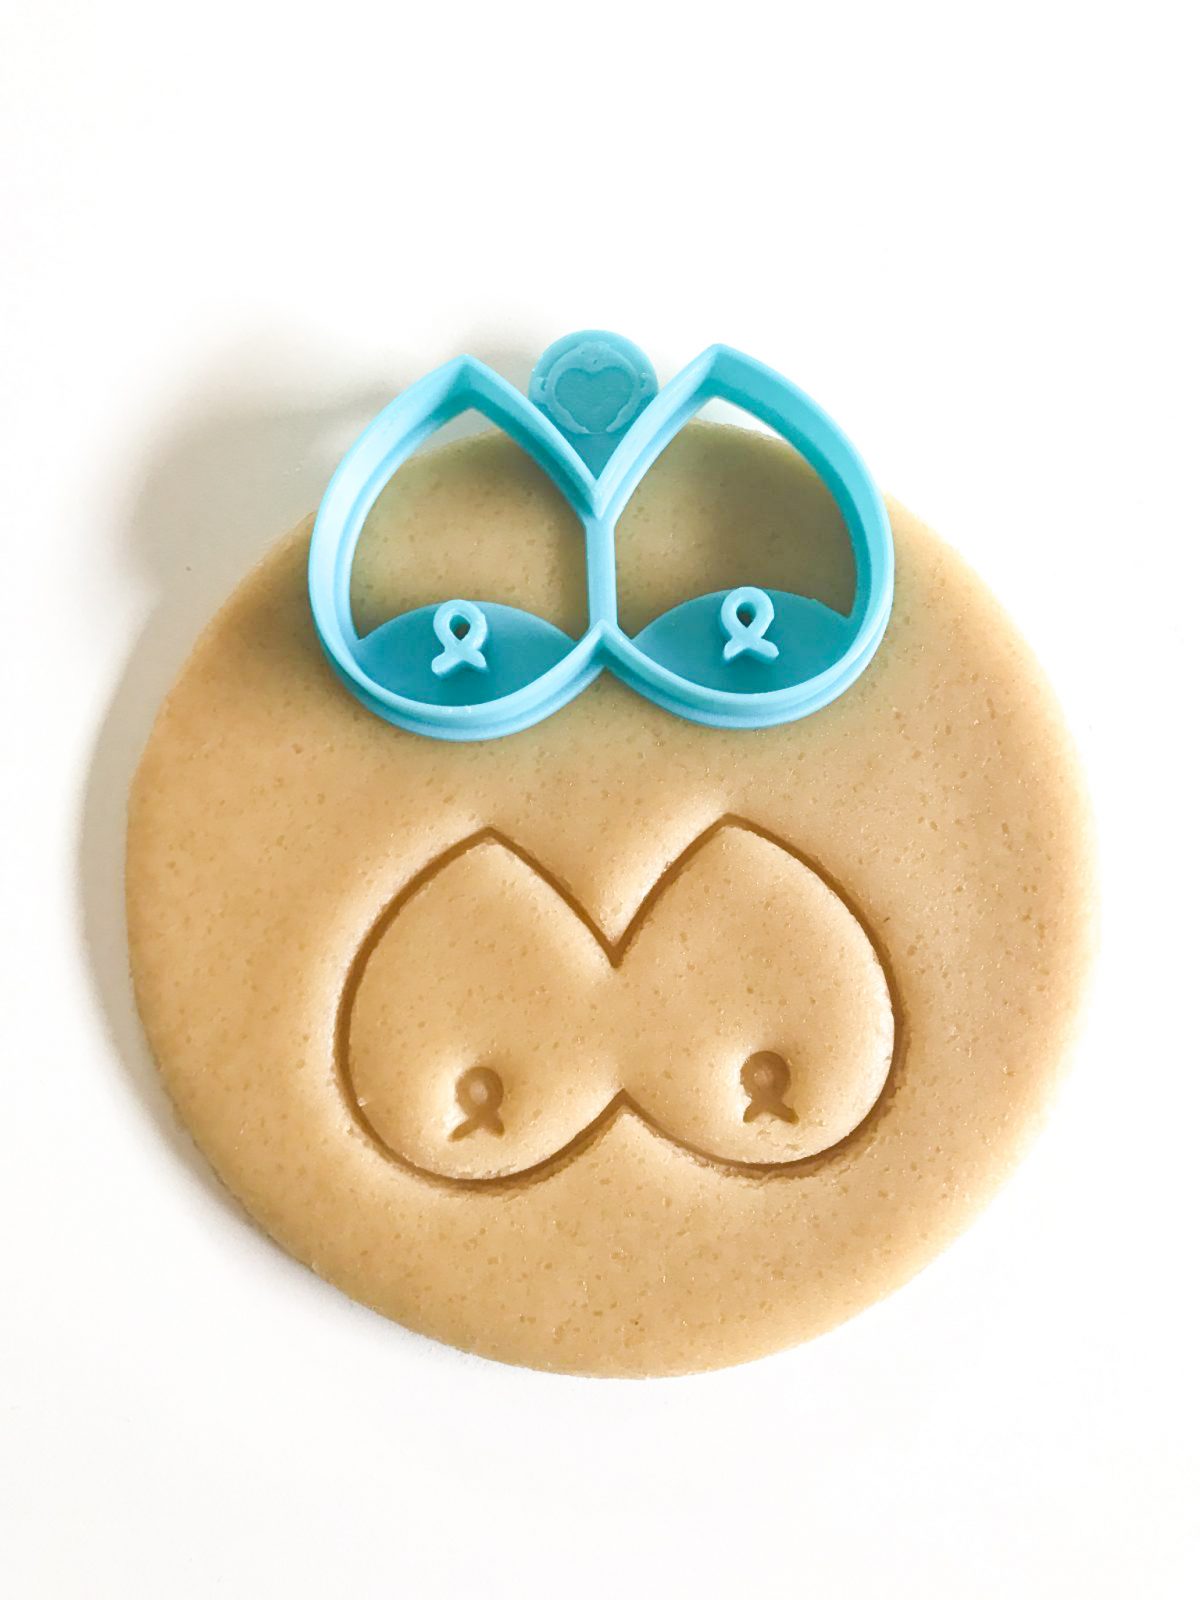 Boobs For Cancer Cookie Cutter